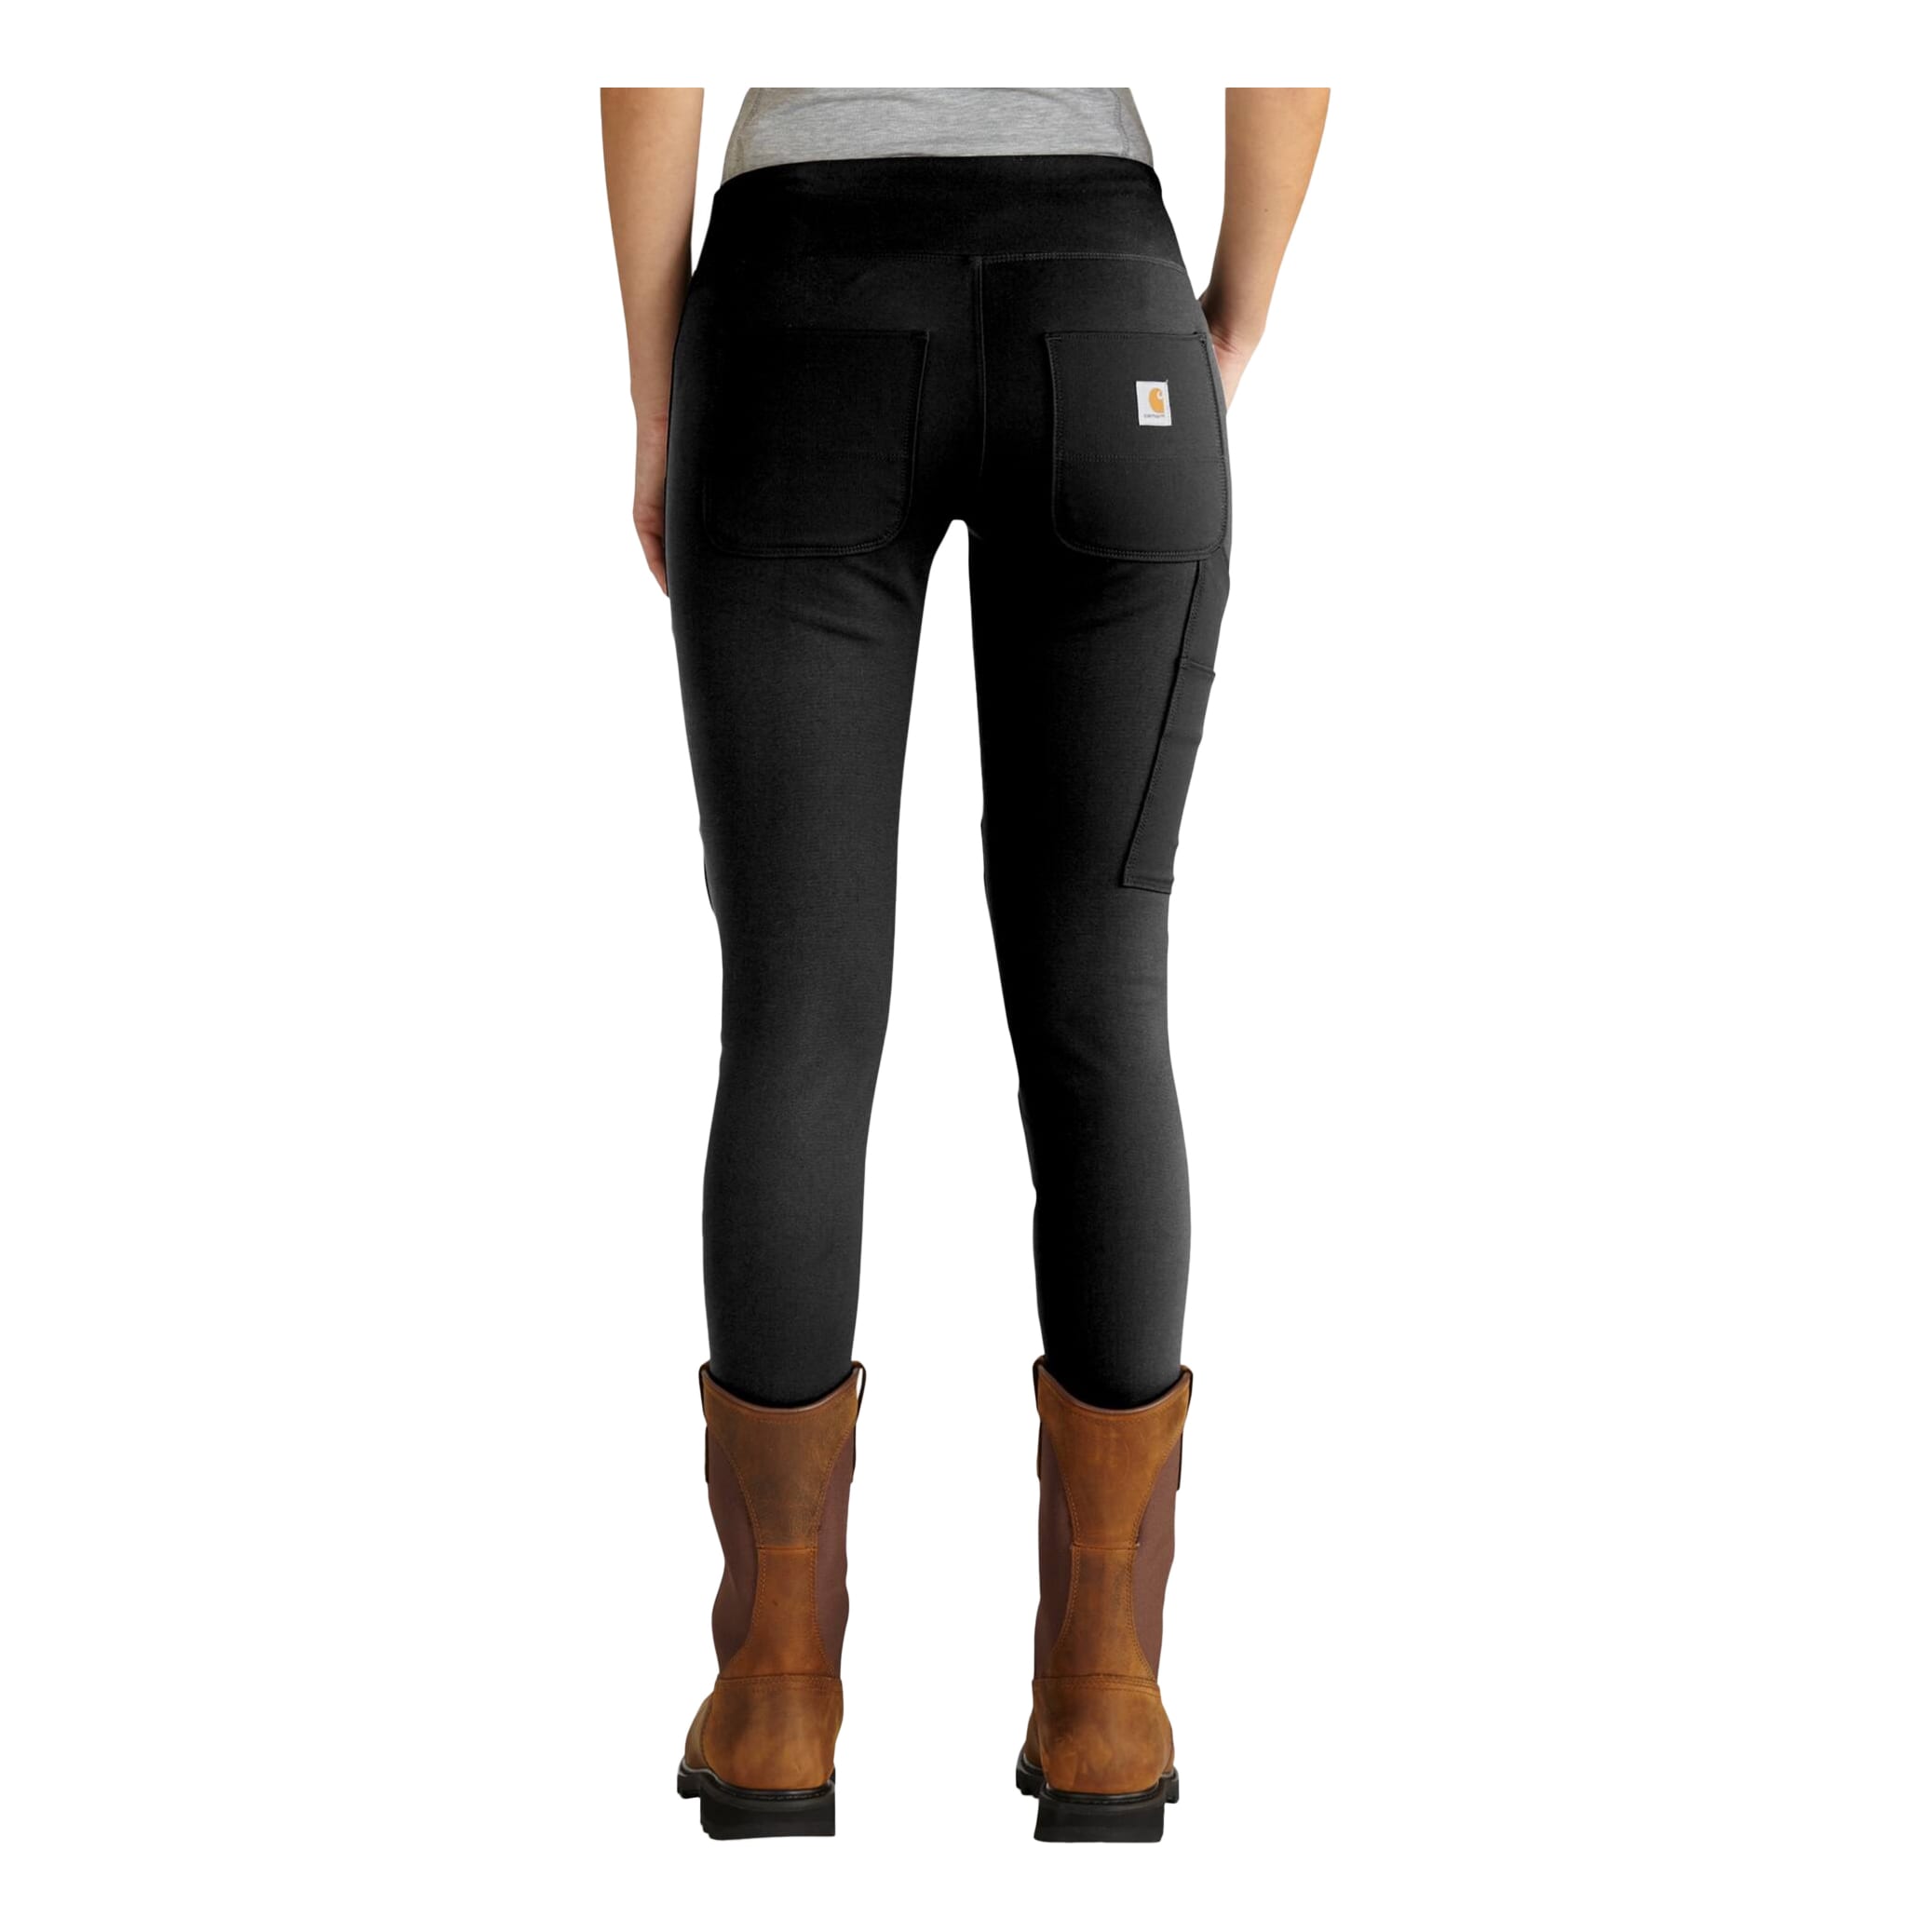 Carhartt® Women’s Force Fitted Midweight Utility Legging - back